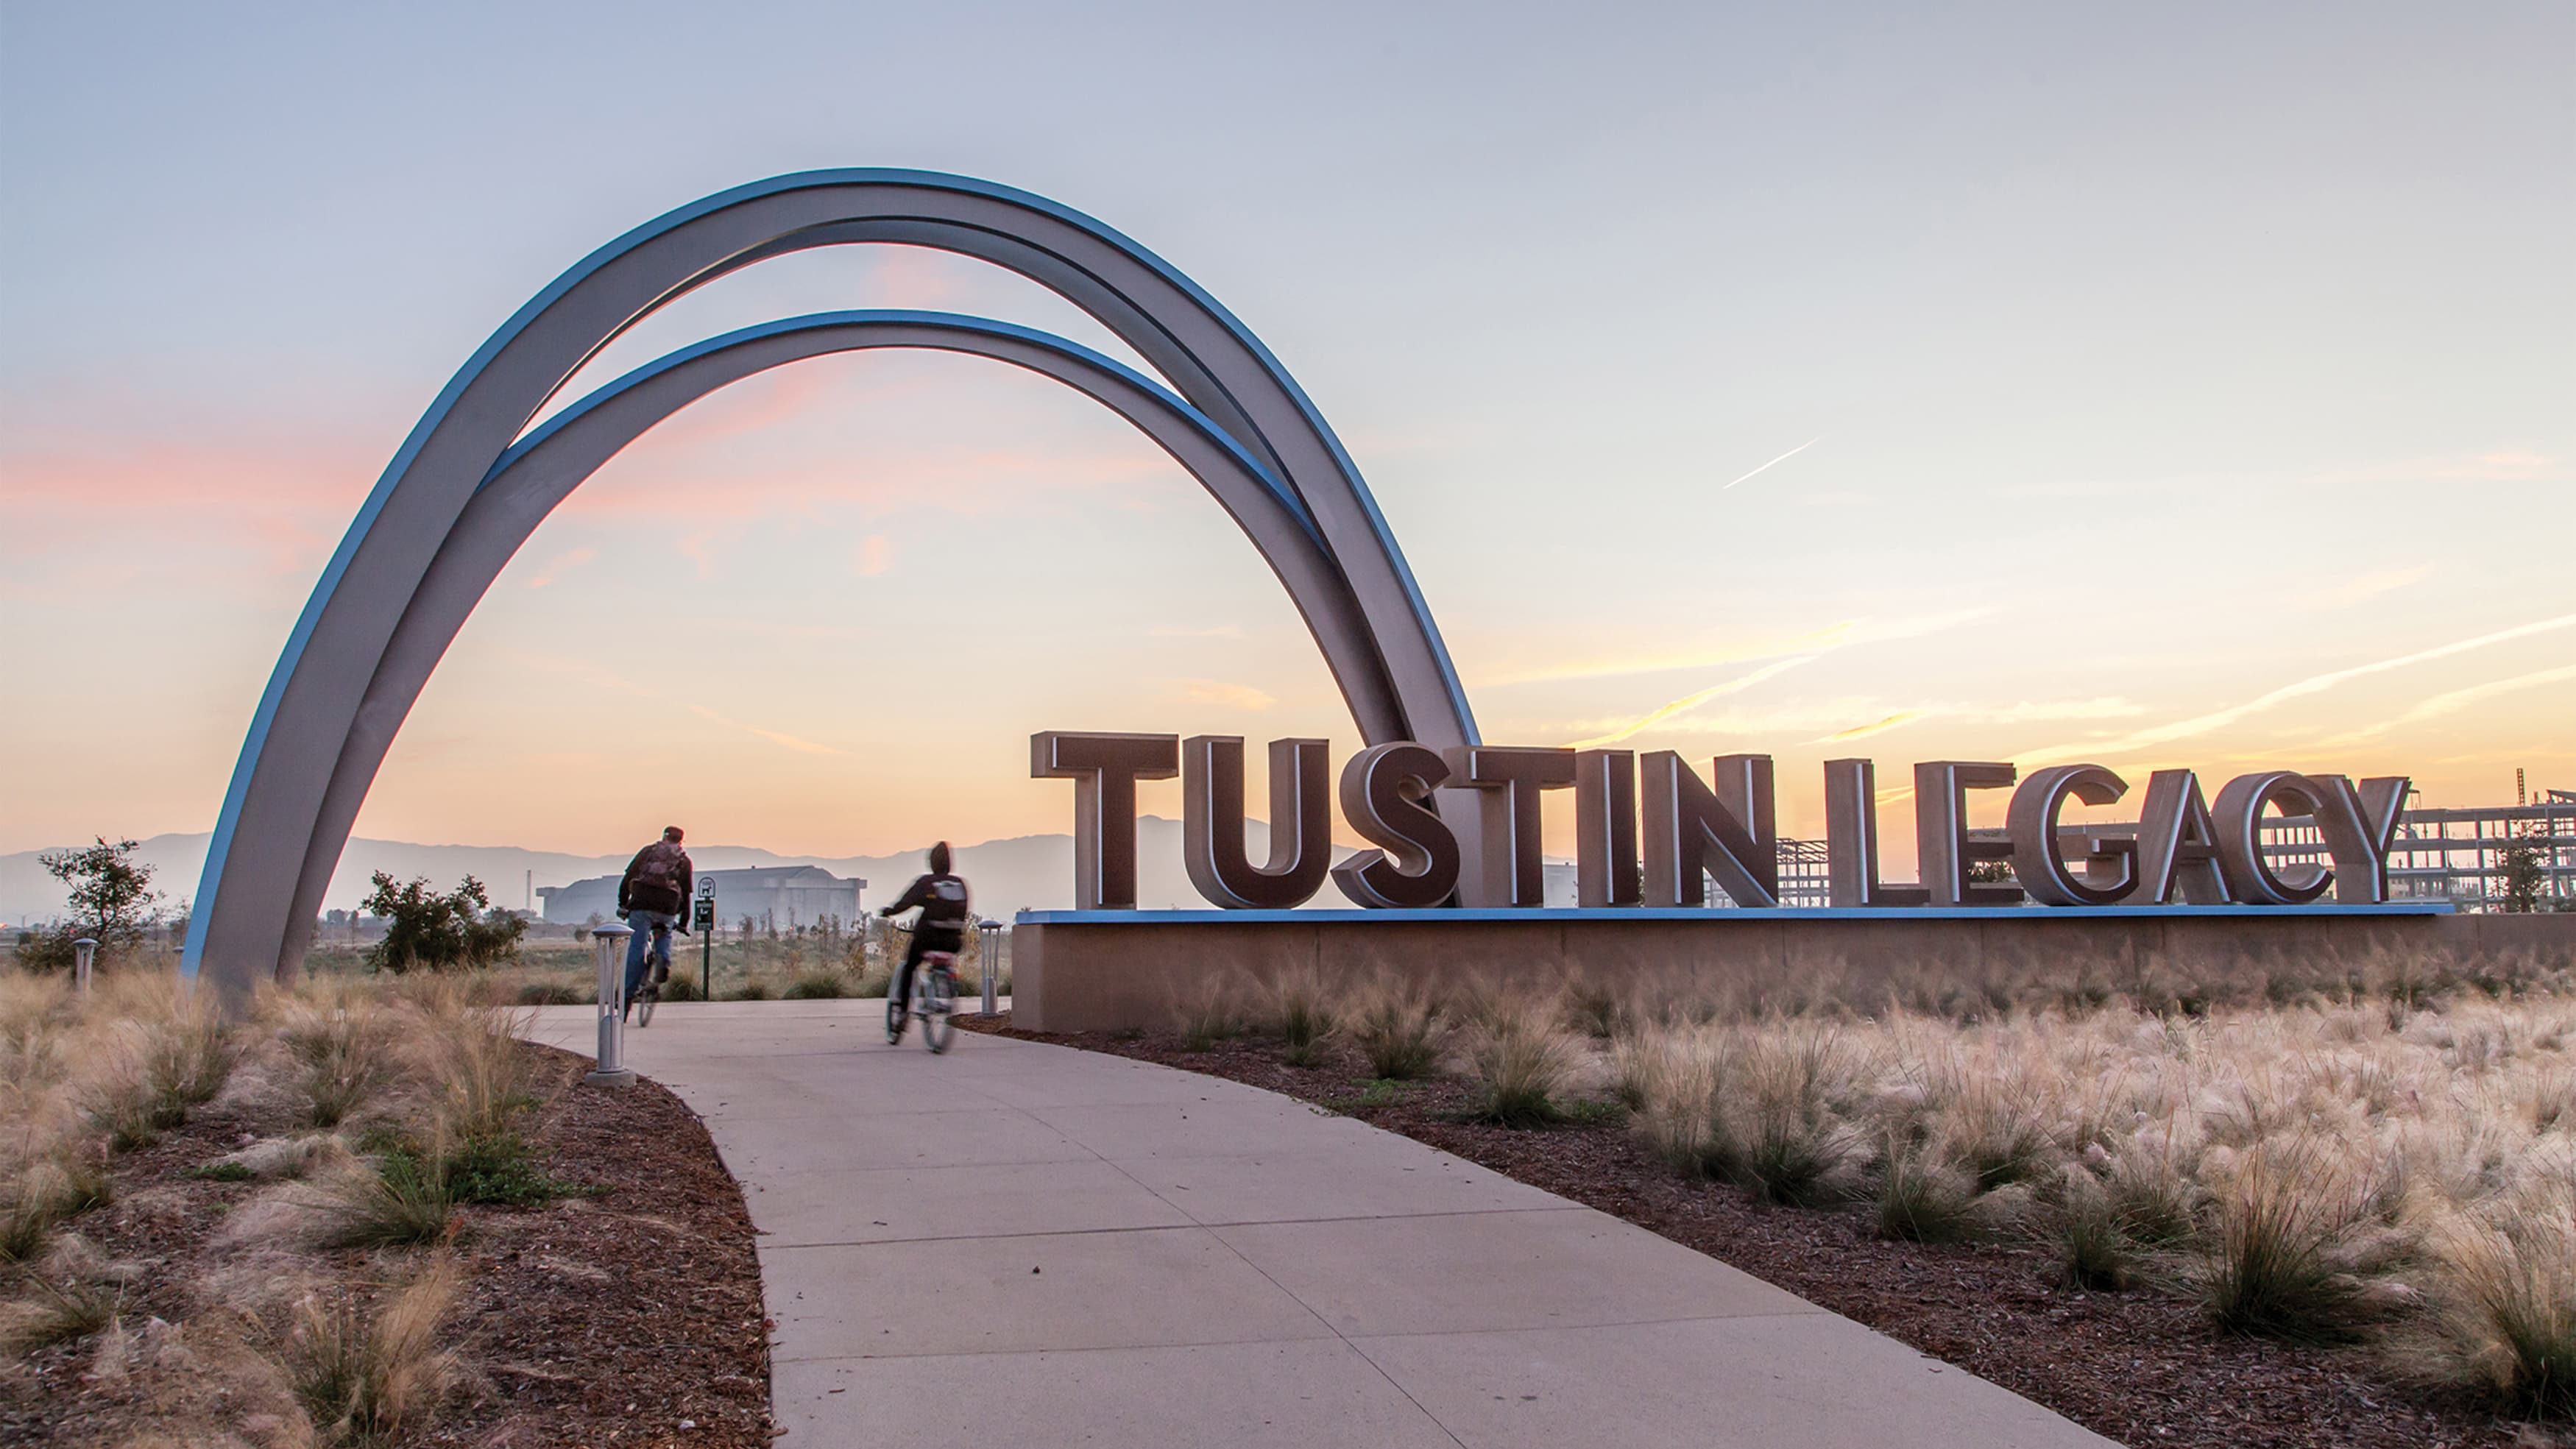 The arch at Tustin Legacy, designed by RSM Design.